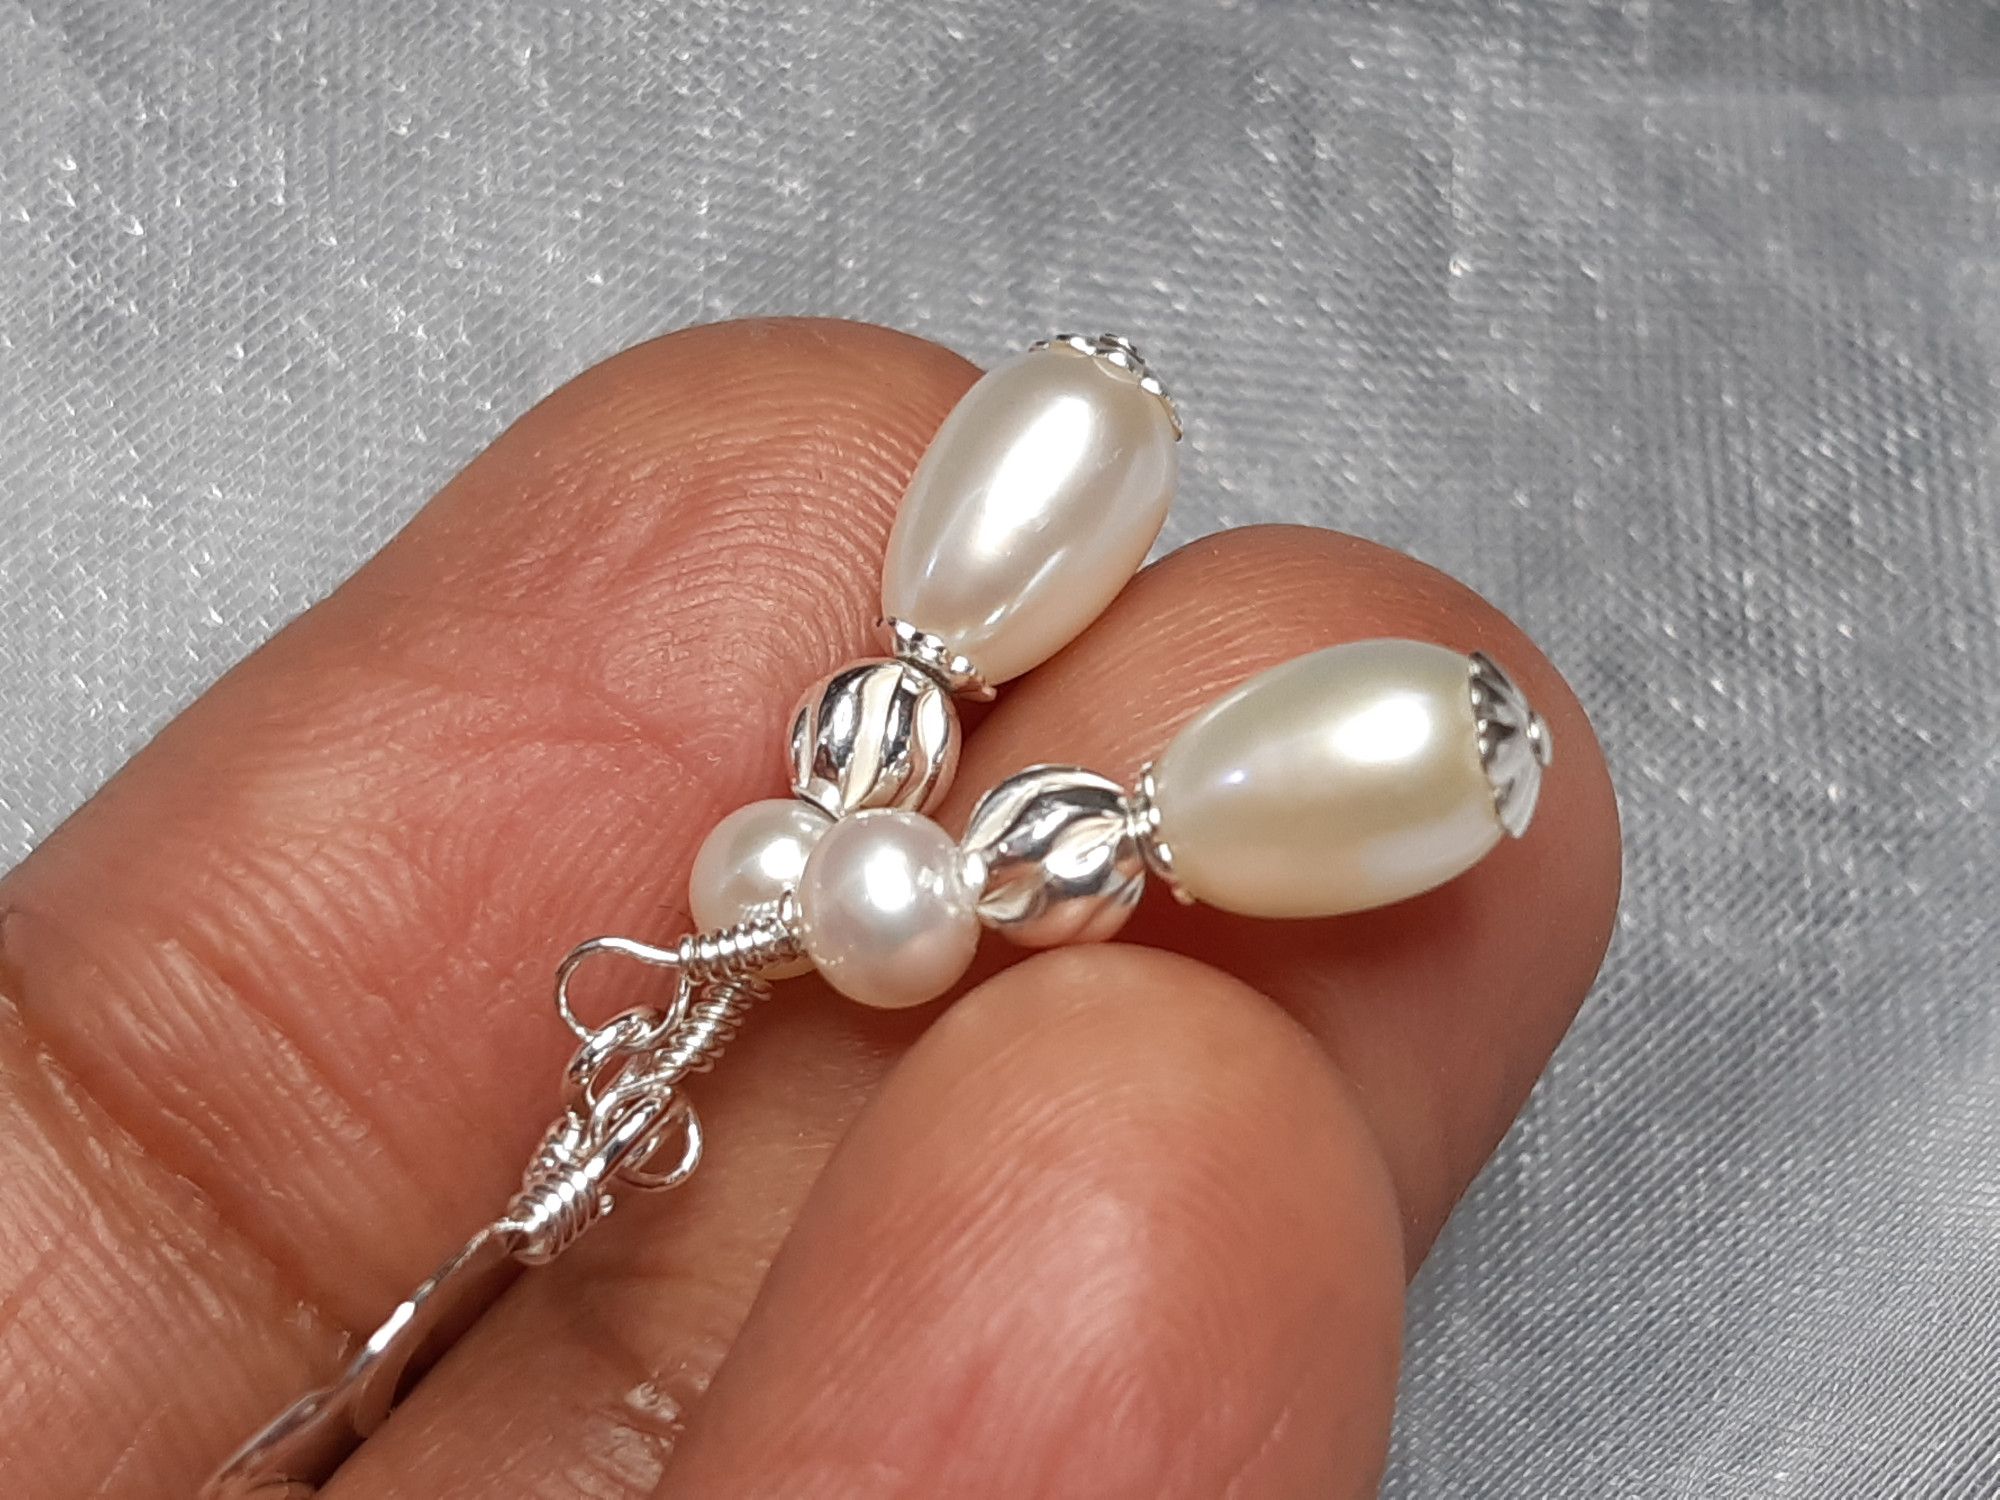 Occasion-bridal-pearl drop earrings with sterling silver-5.jpg